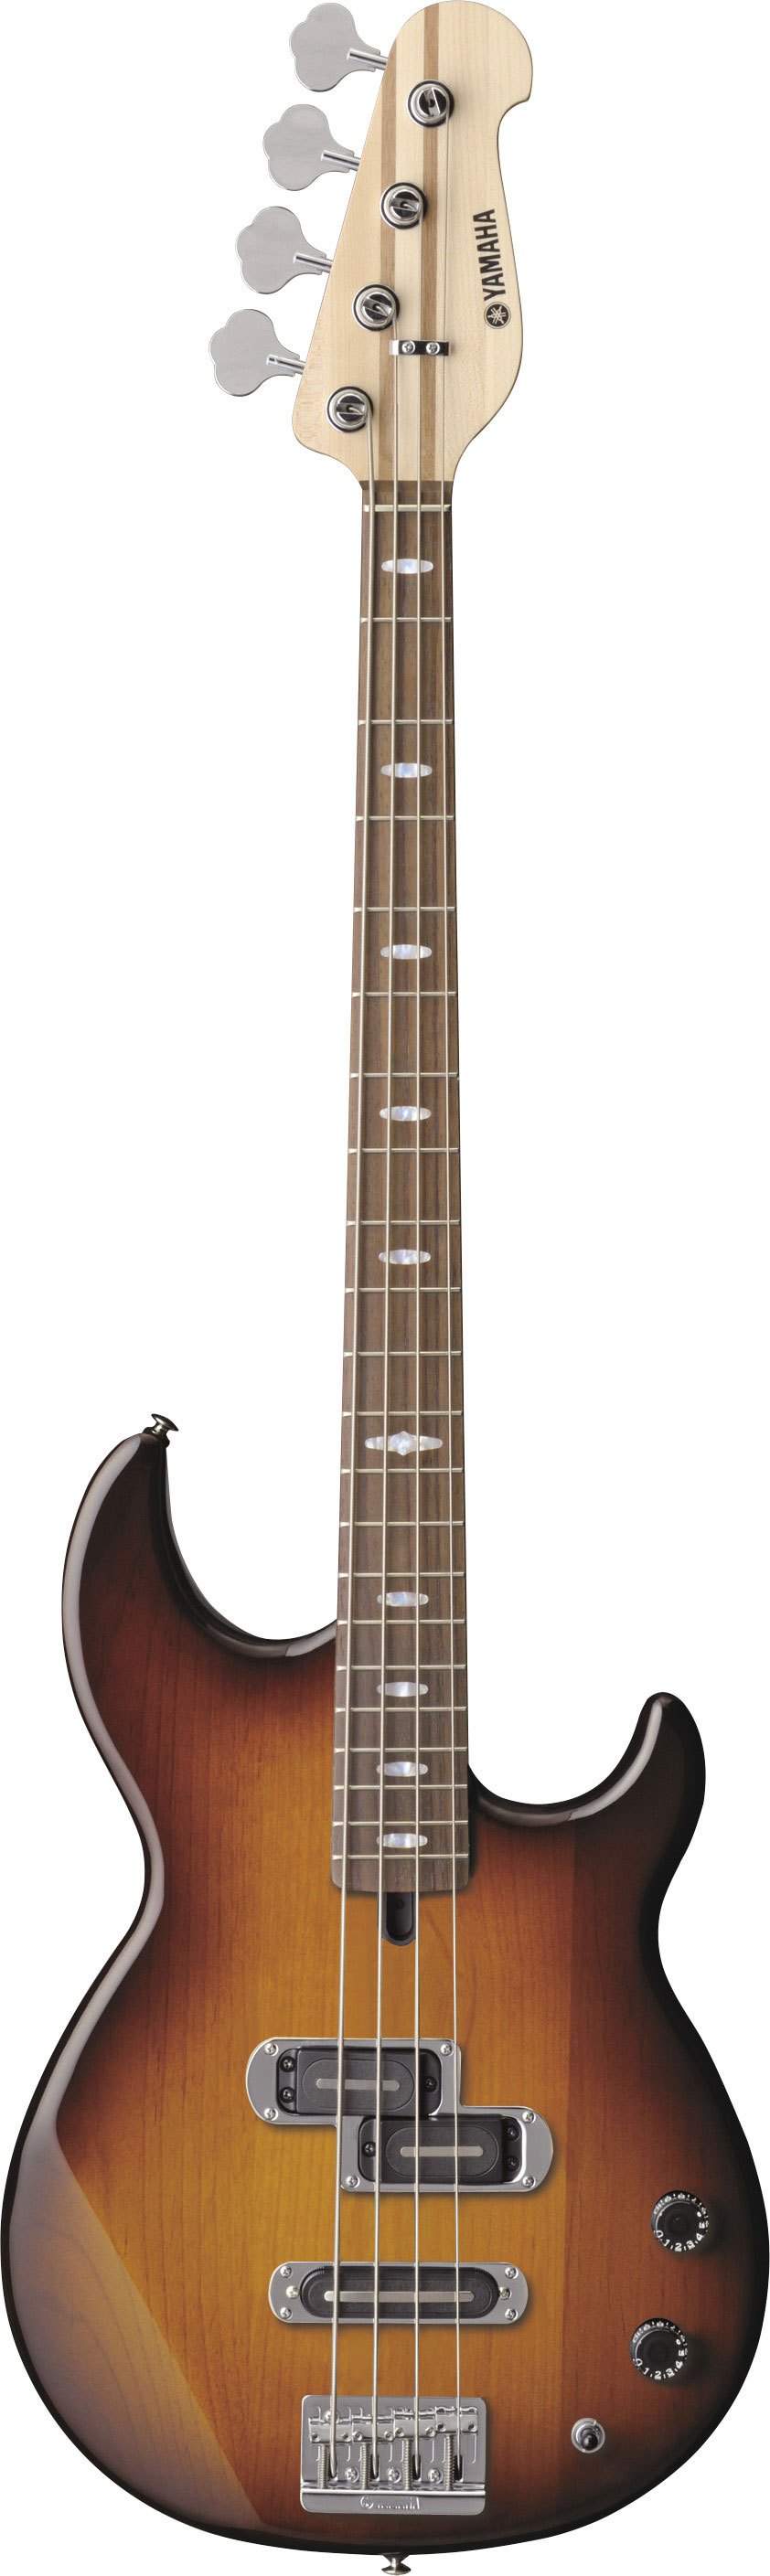 BB - Overview - Electric Basses - Guitars